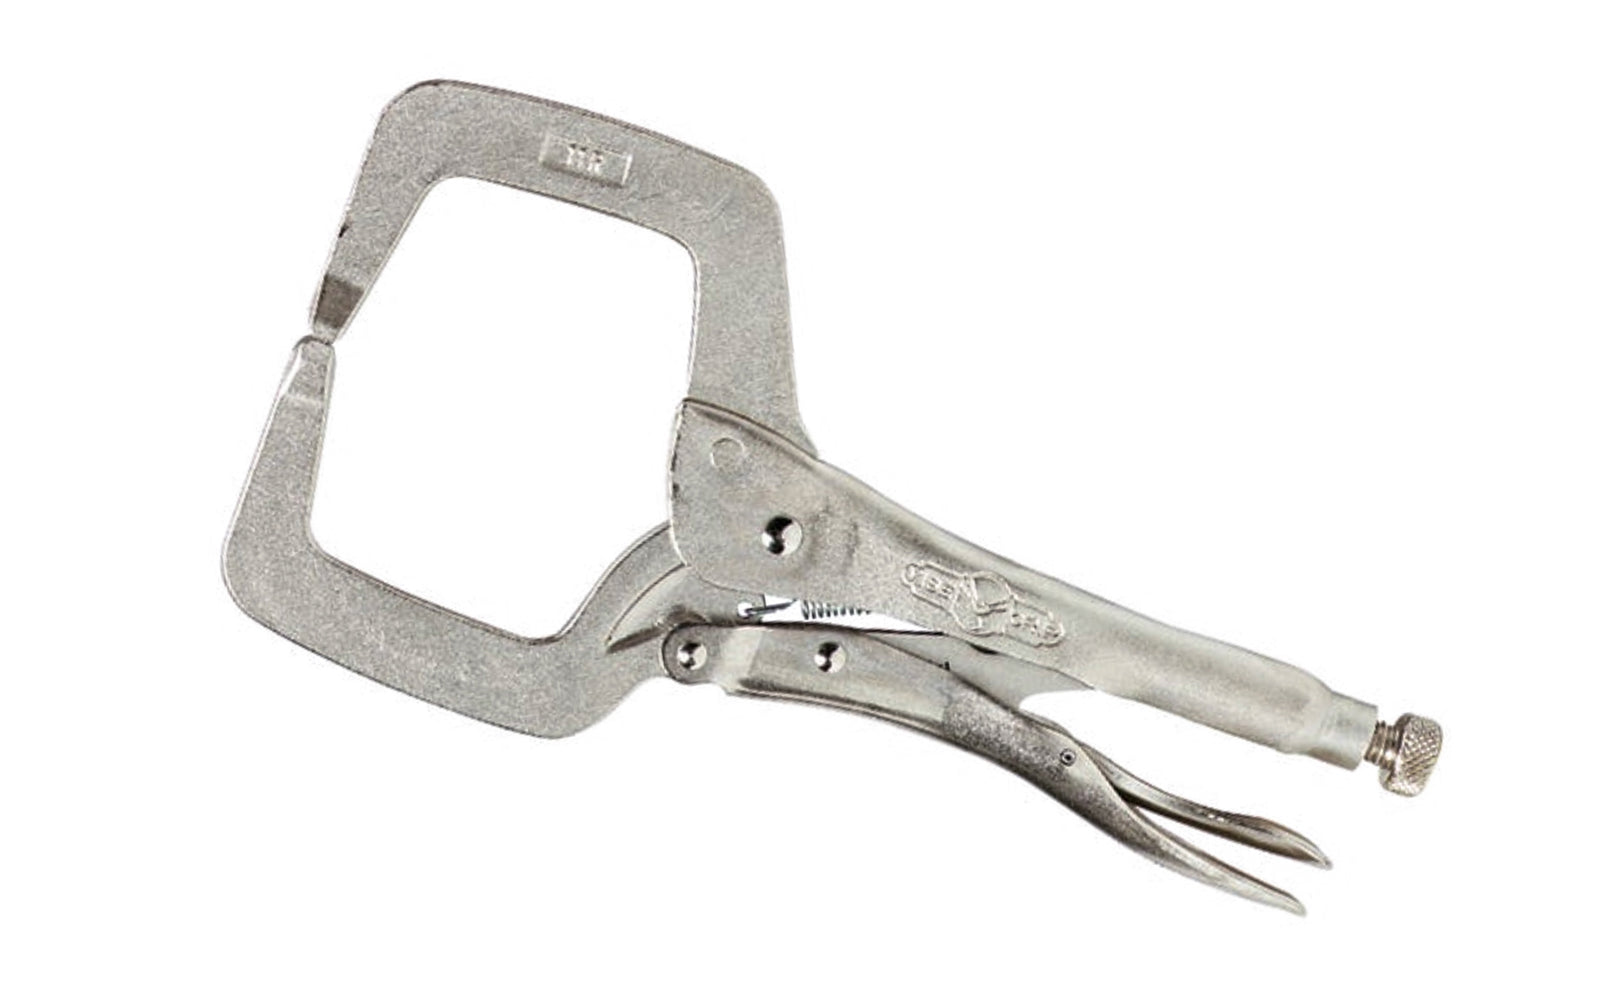 Irwin 11" "The Original" Vise Grip Locking C-Clamp Plier. Model 11R. Item No. 19. Turn screw to adjust pressure and fit work. Stays adjusted for repetitive use. Constructed of high-grade heat-treated alloy steel for maximum toughness & durability. 4" Jaw Capacity.